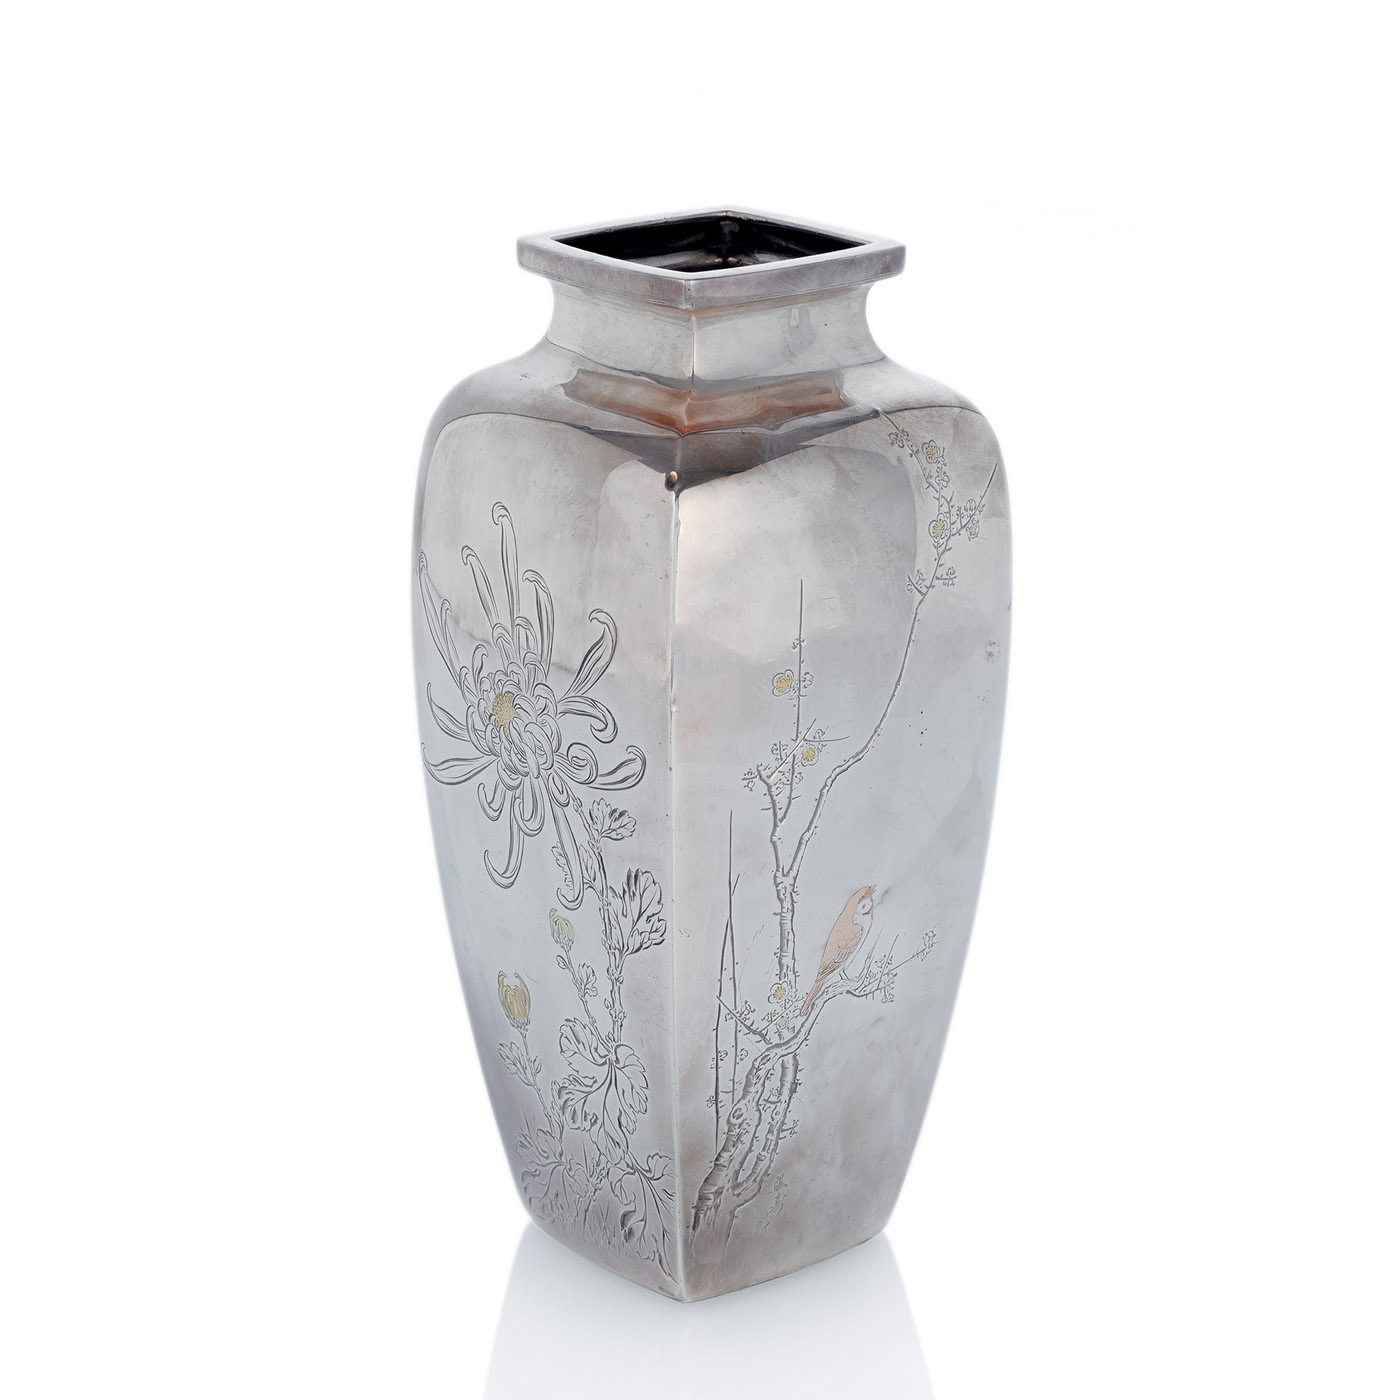 <b>A SQUARE-SHAPED SILVER VASE WITH FLORAL DECORATION</b>